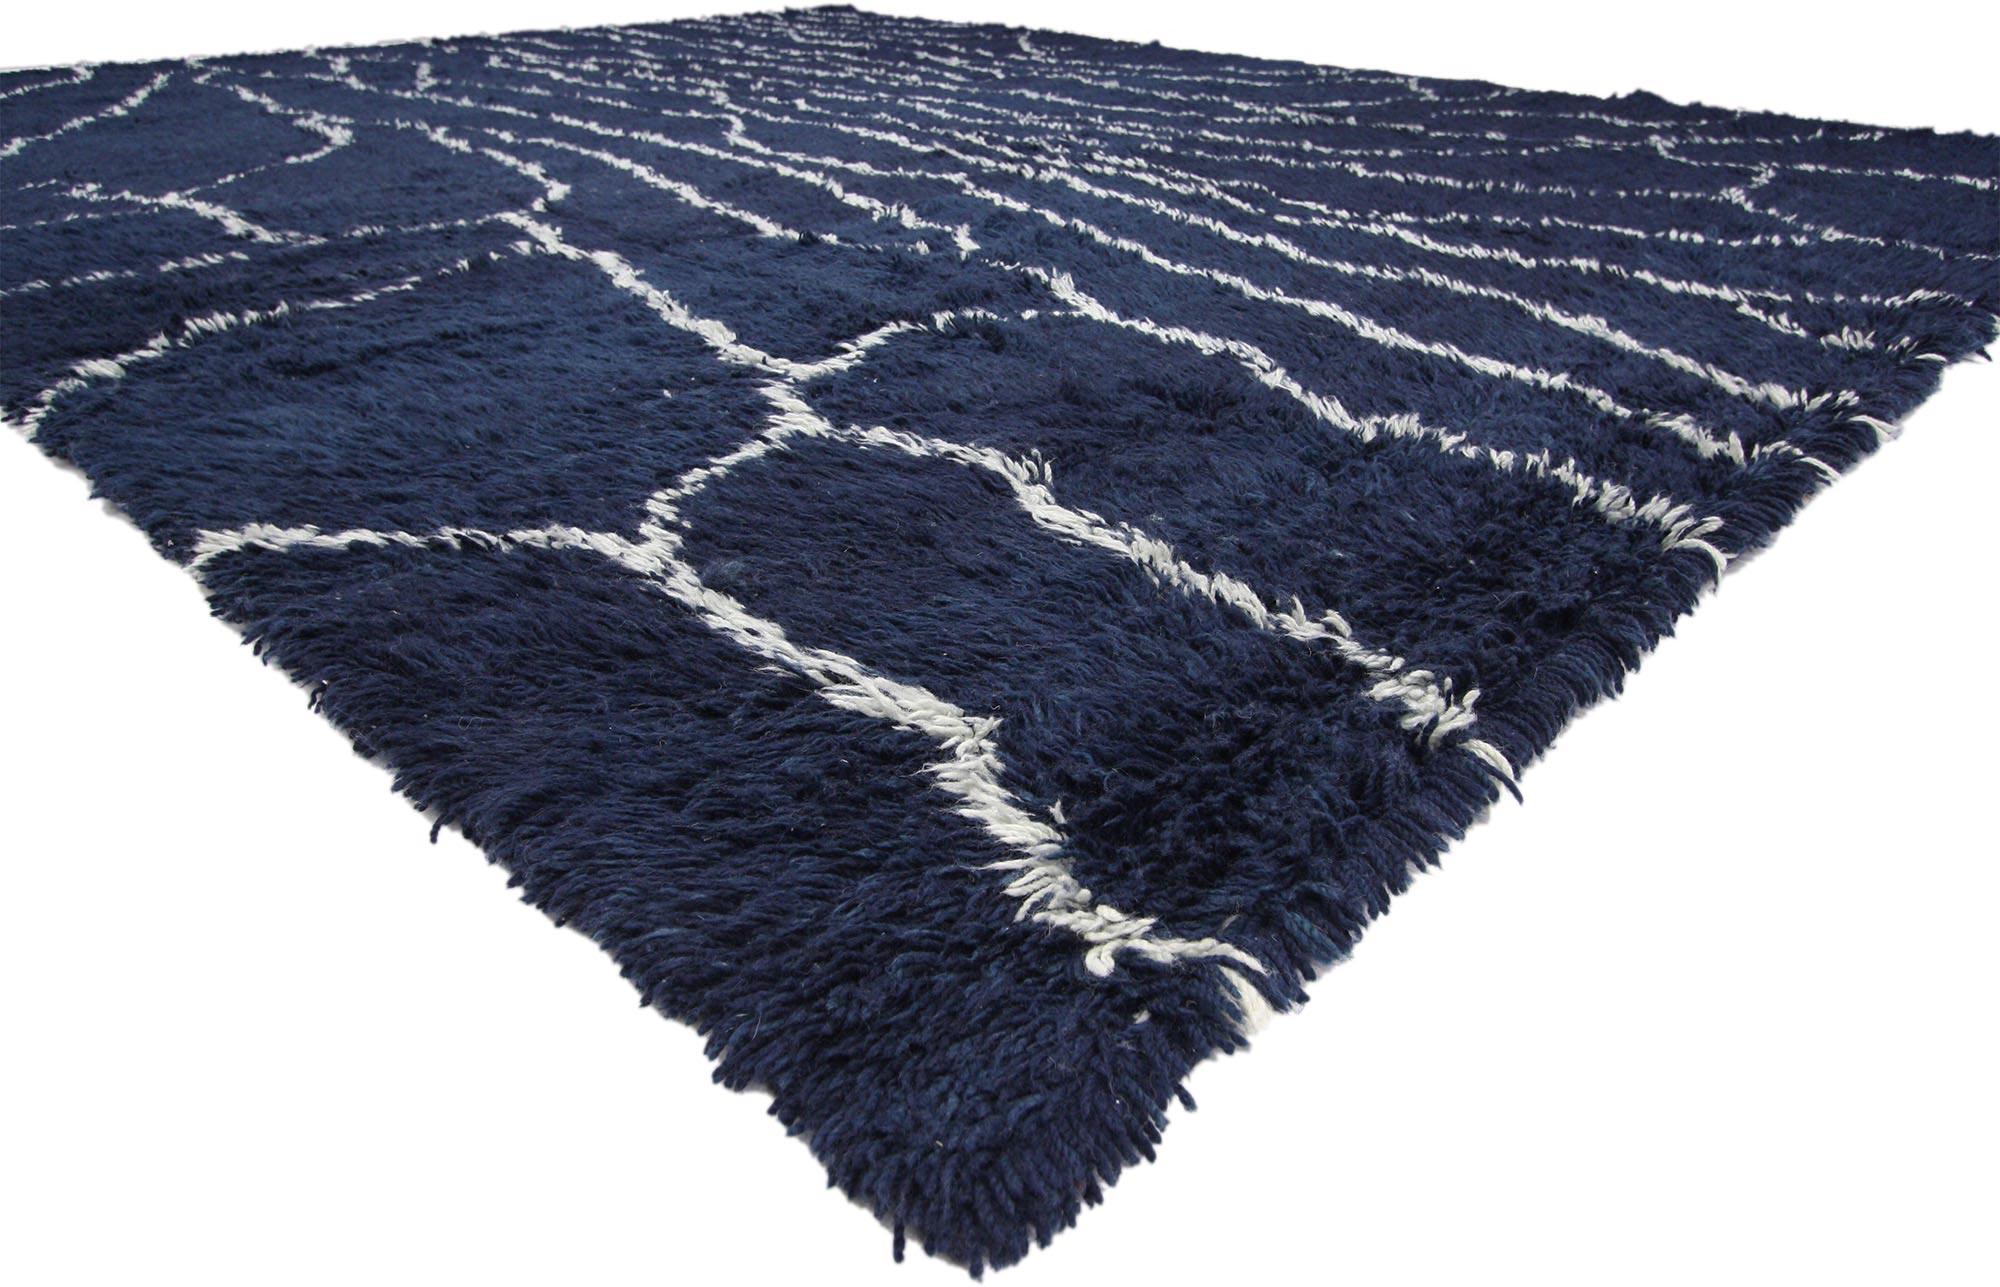 30387 new Contemporary Moroccan style rug 10'10 x 13'04. With its simplicity, plush pile and Mid-Century Modern Bohemian vibes, this hand knotted wool contemporary Moroccan style rug is a captivating vision of woven beauty. The abrashed navy blue